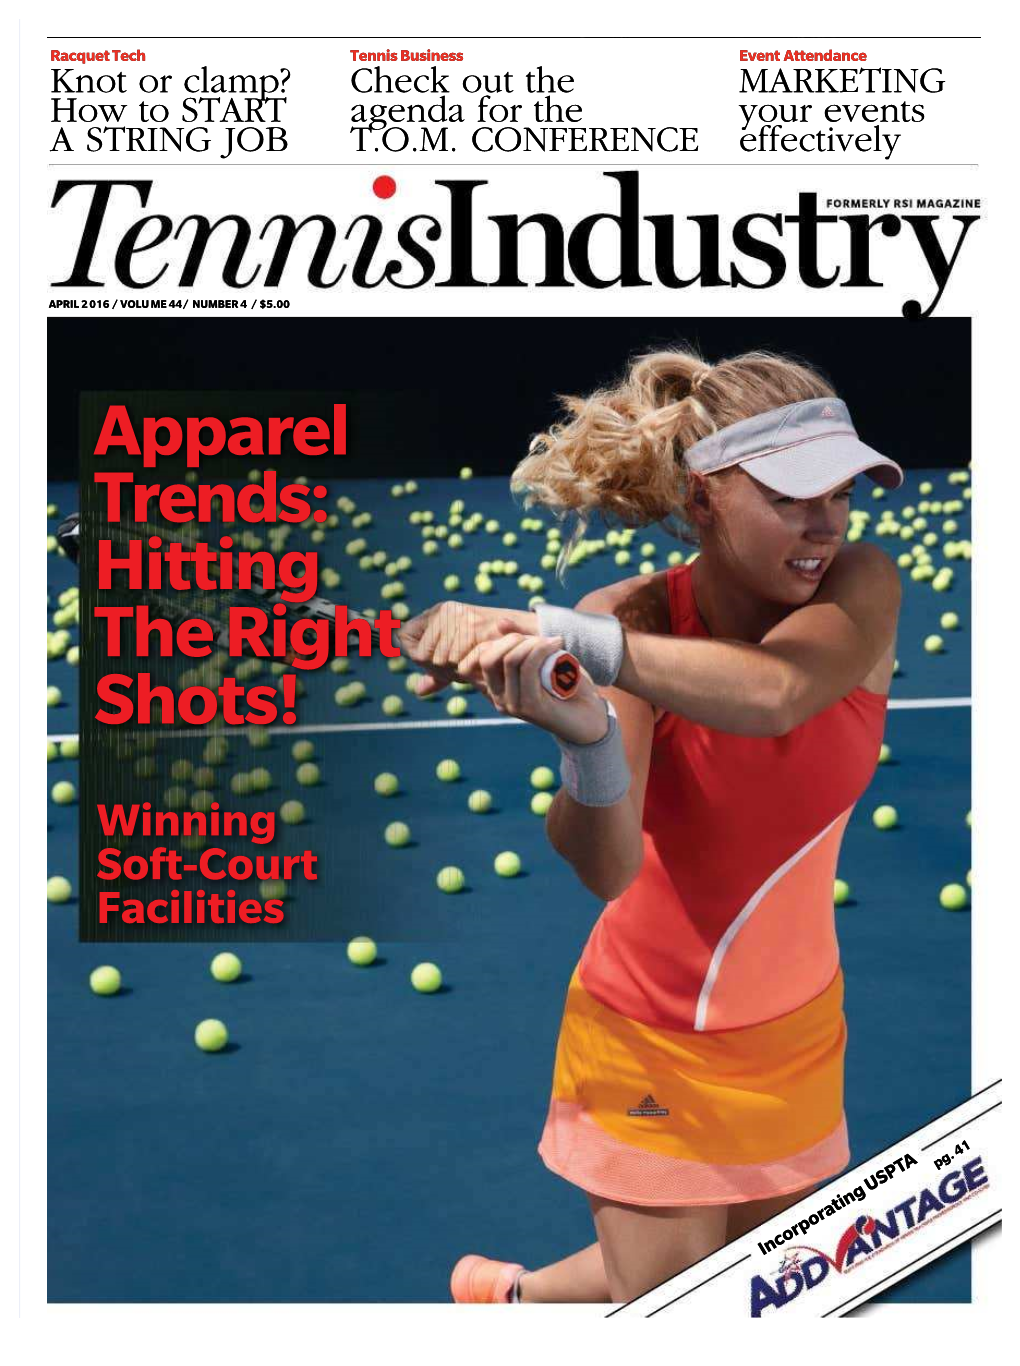 Apparel Trends: Hitting the Right Shots!